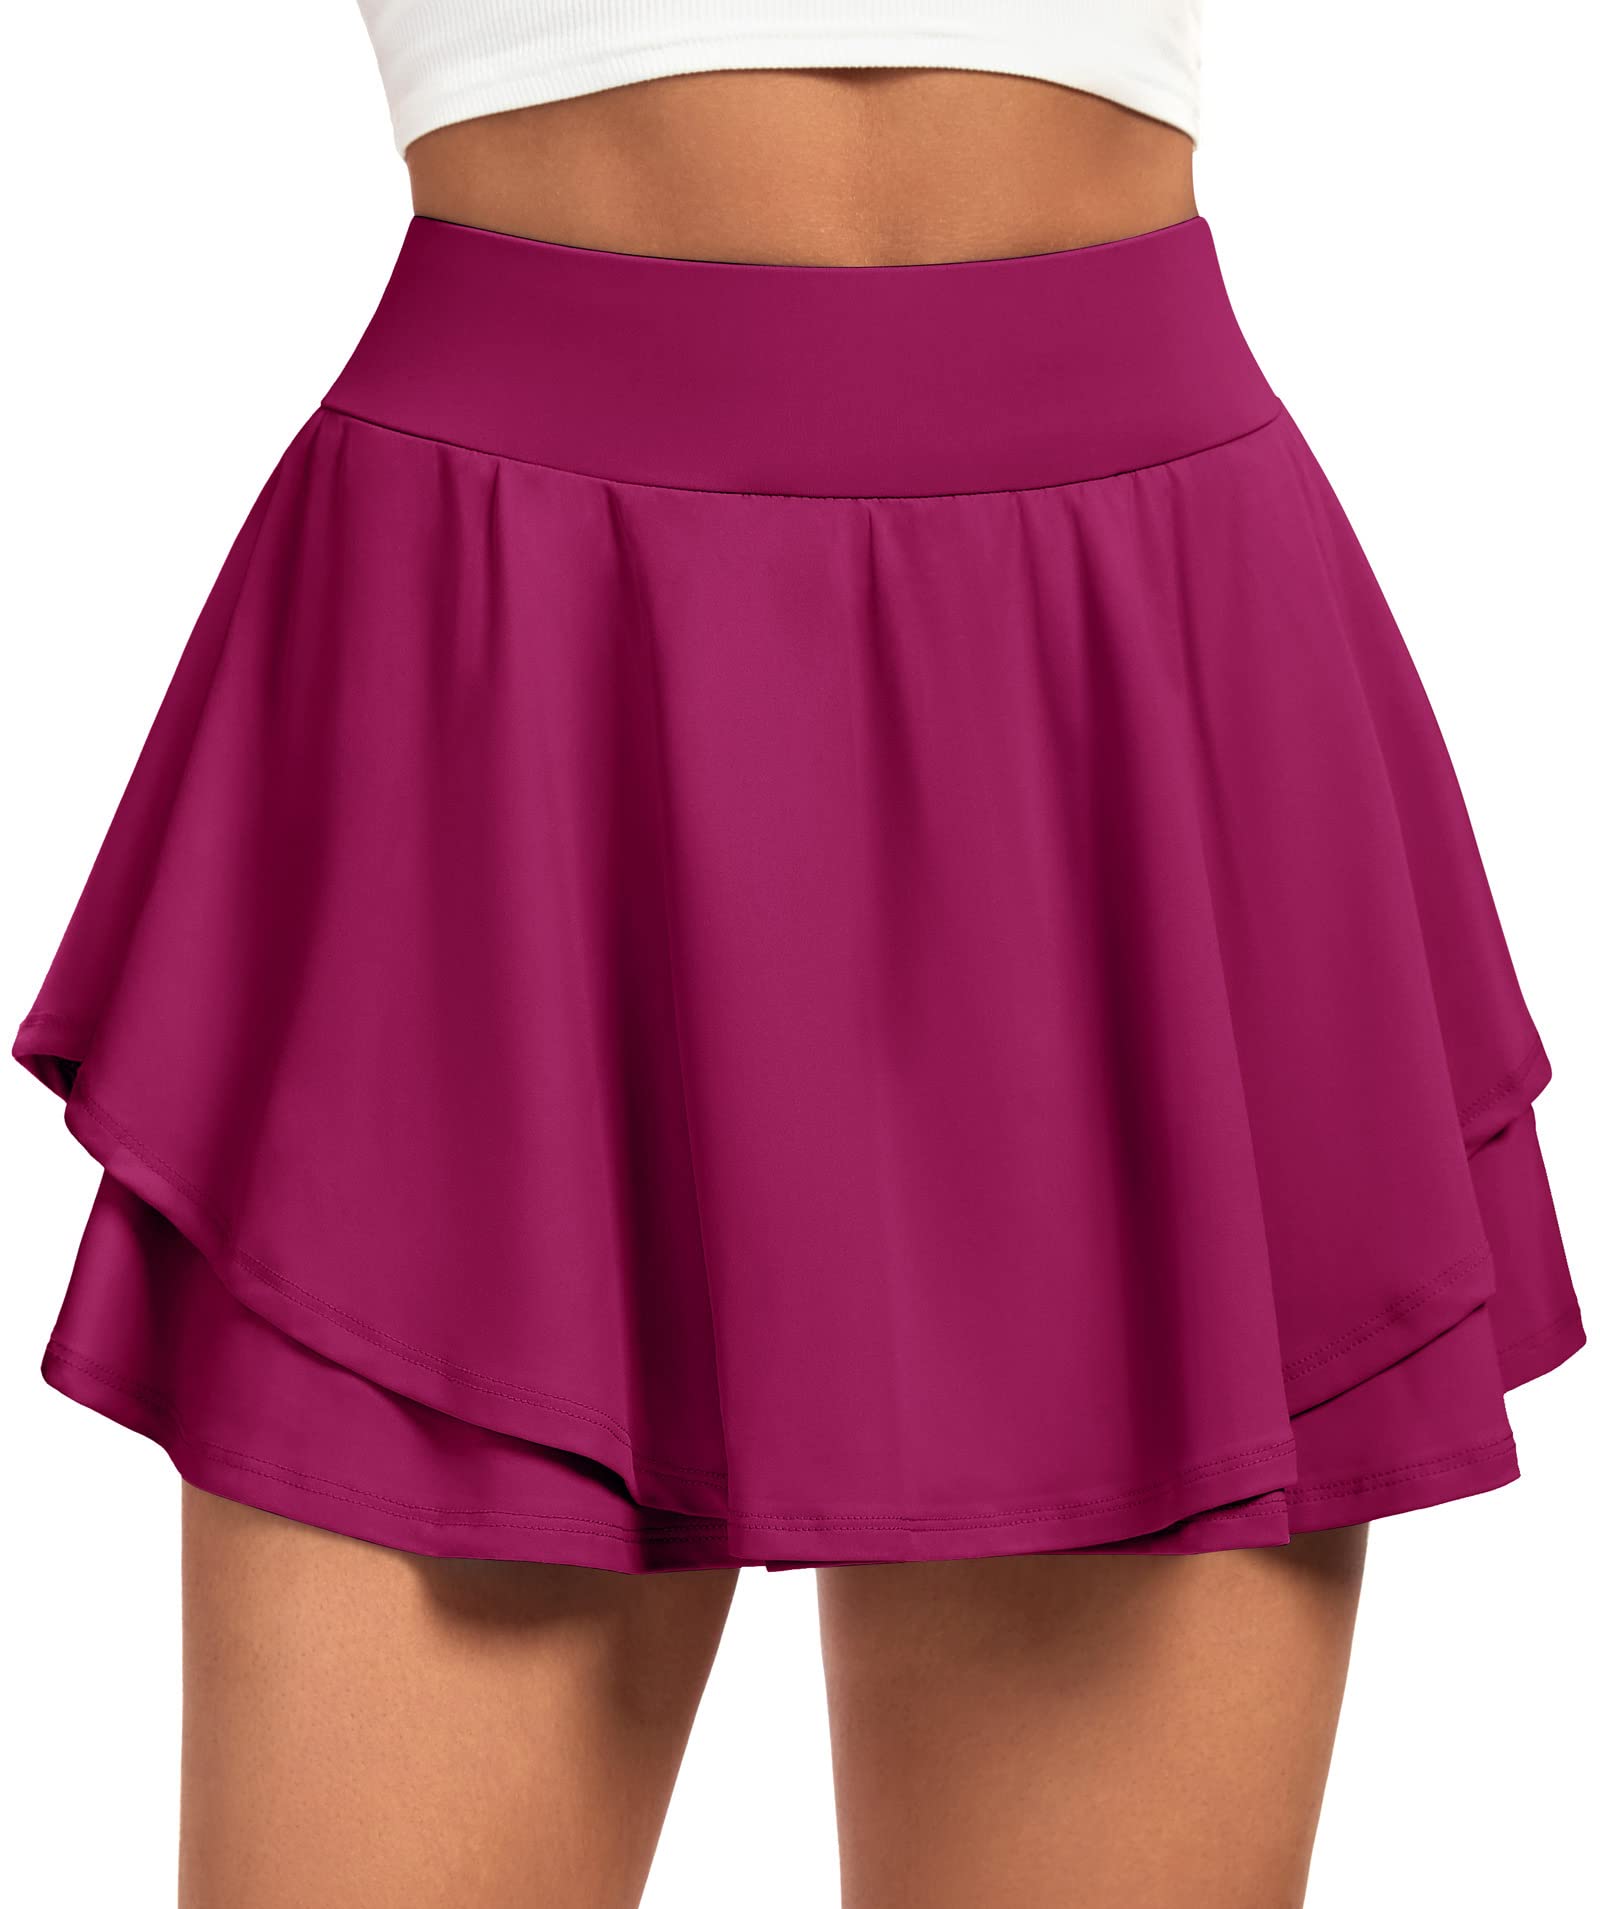 IUGA Tennis Skirts for Women with Pockets Shorts Athletic Golf Skorts  Skirts for Women High Waisted Running Workout Skorts Magenta Large